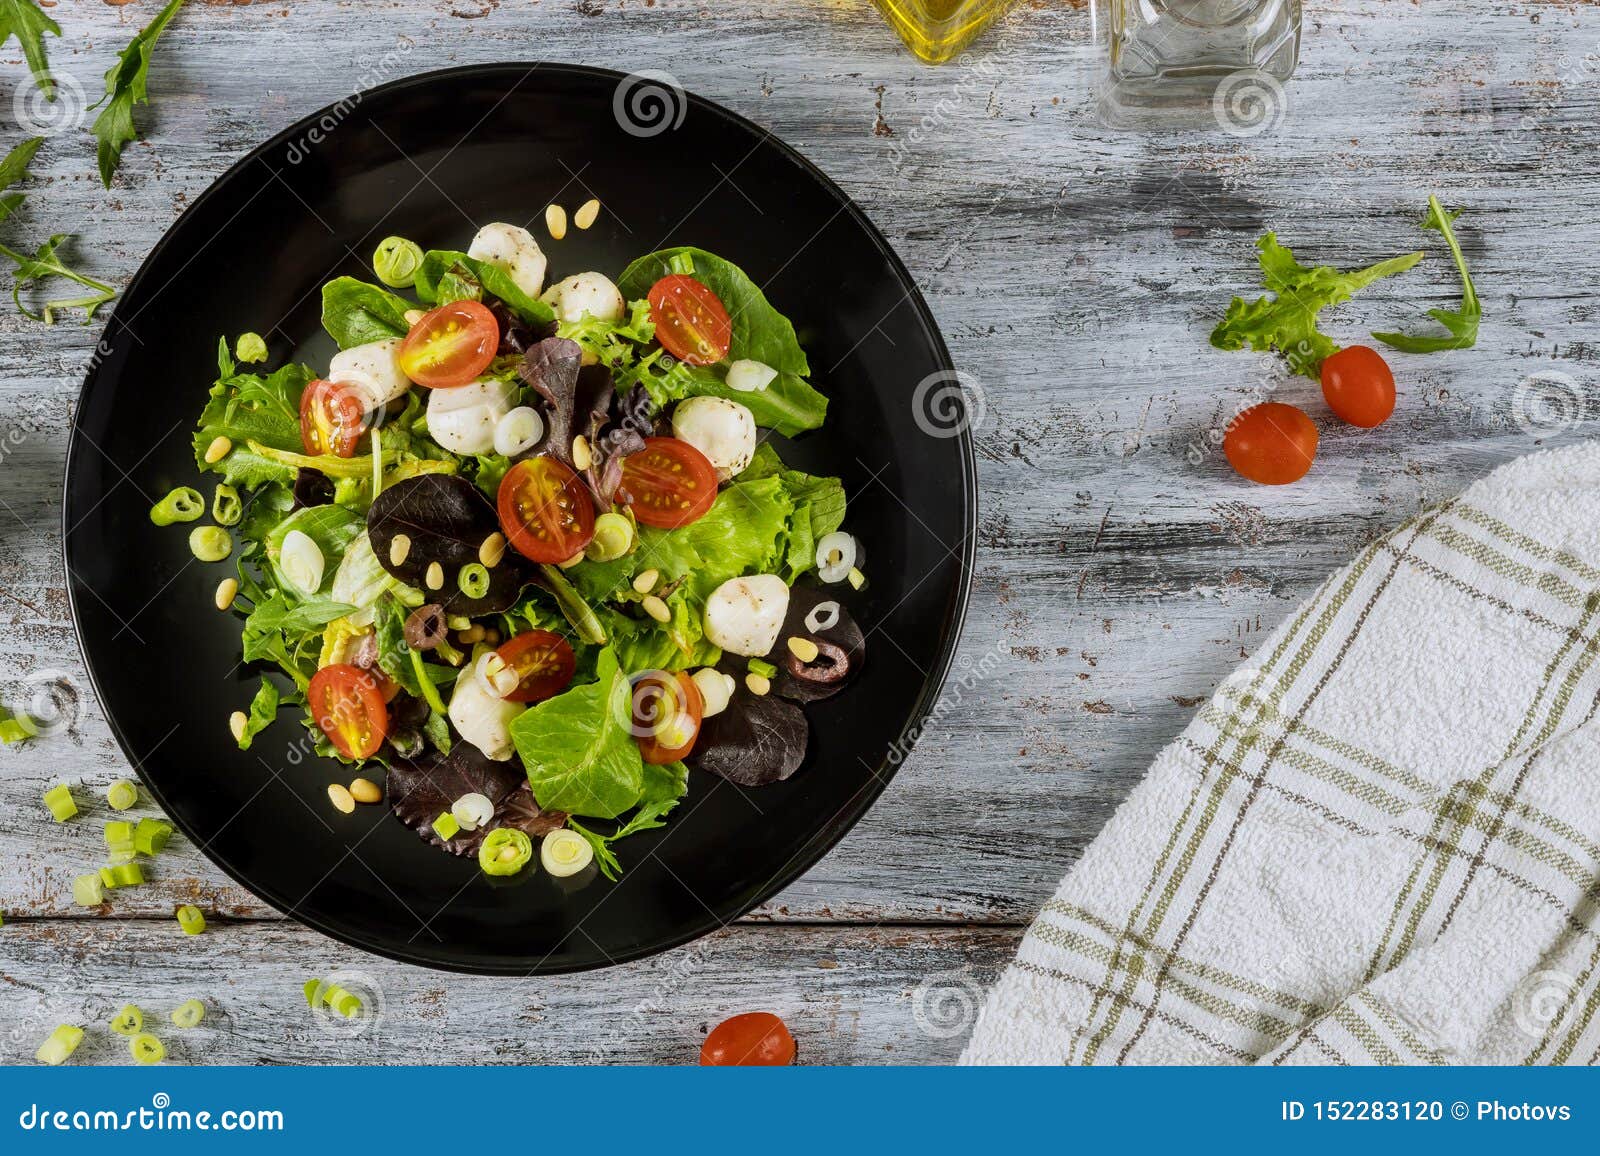 Tomato Salad With Cottage Cheese Olive Oil Healthy Food Spring